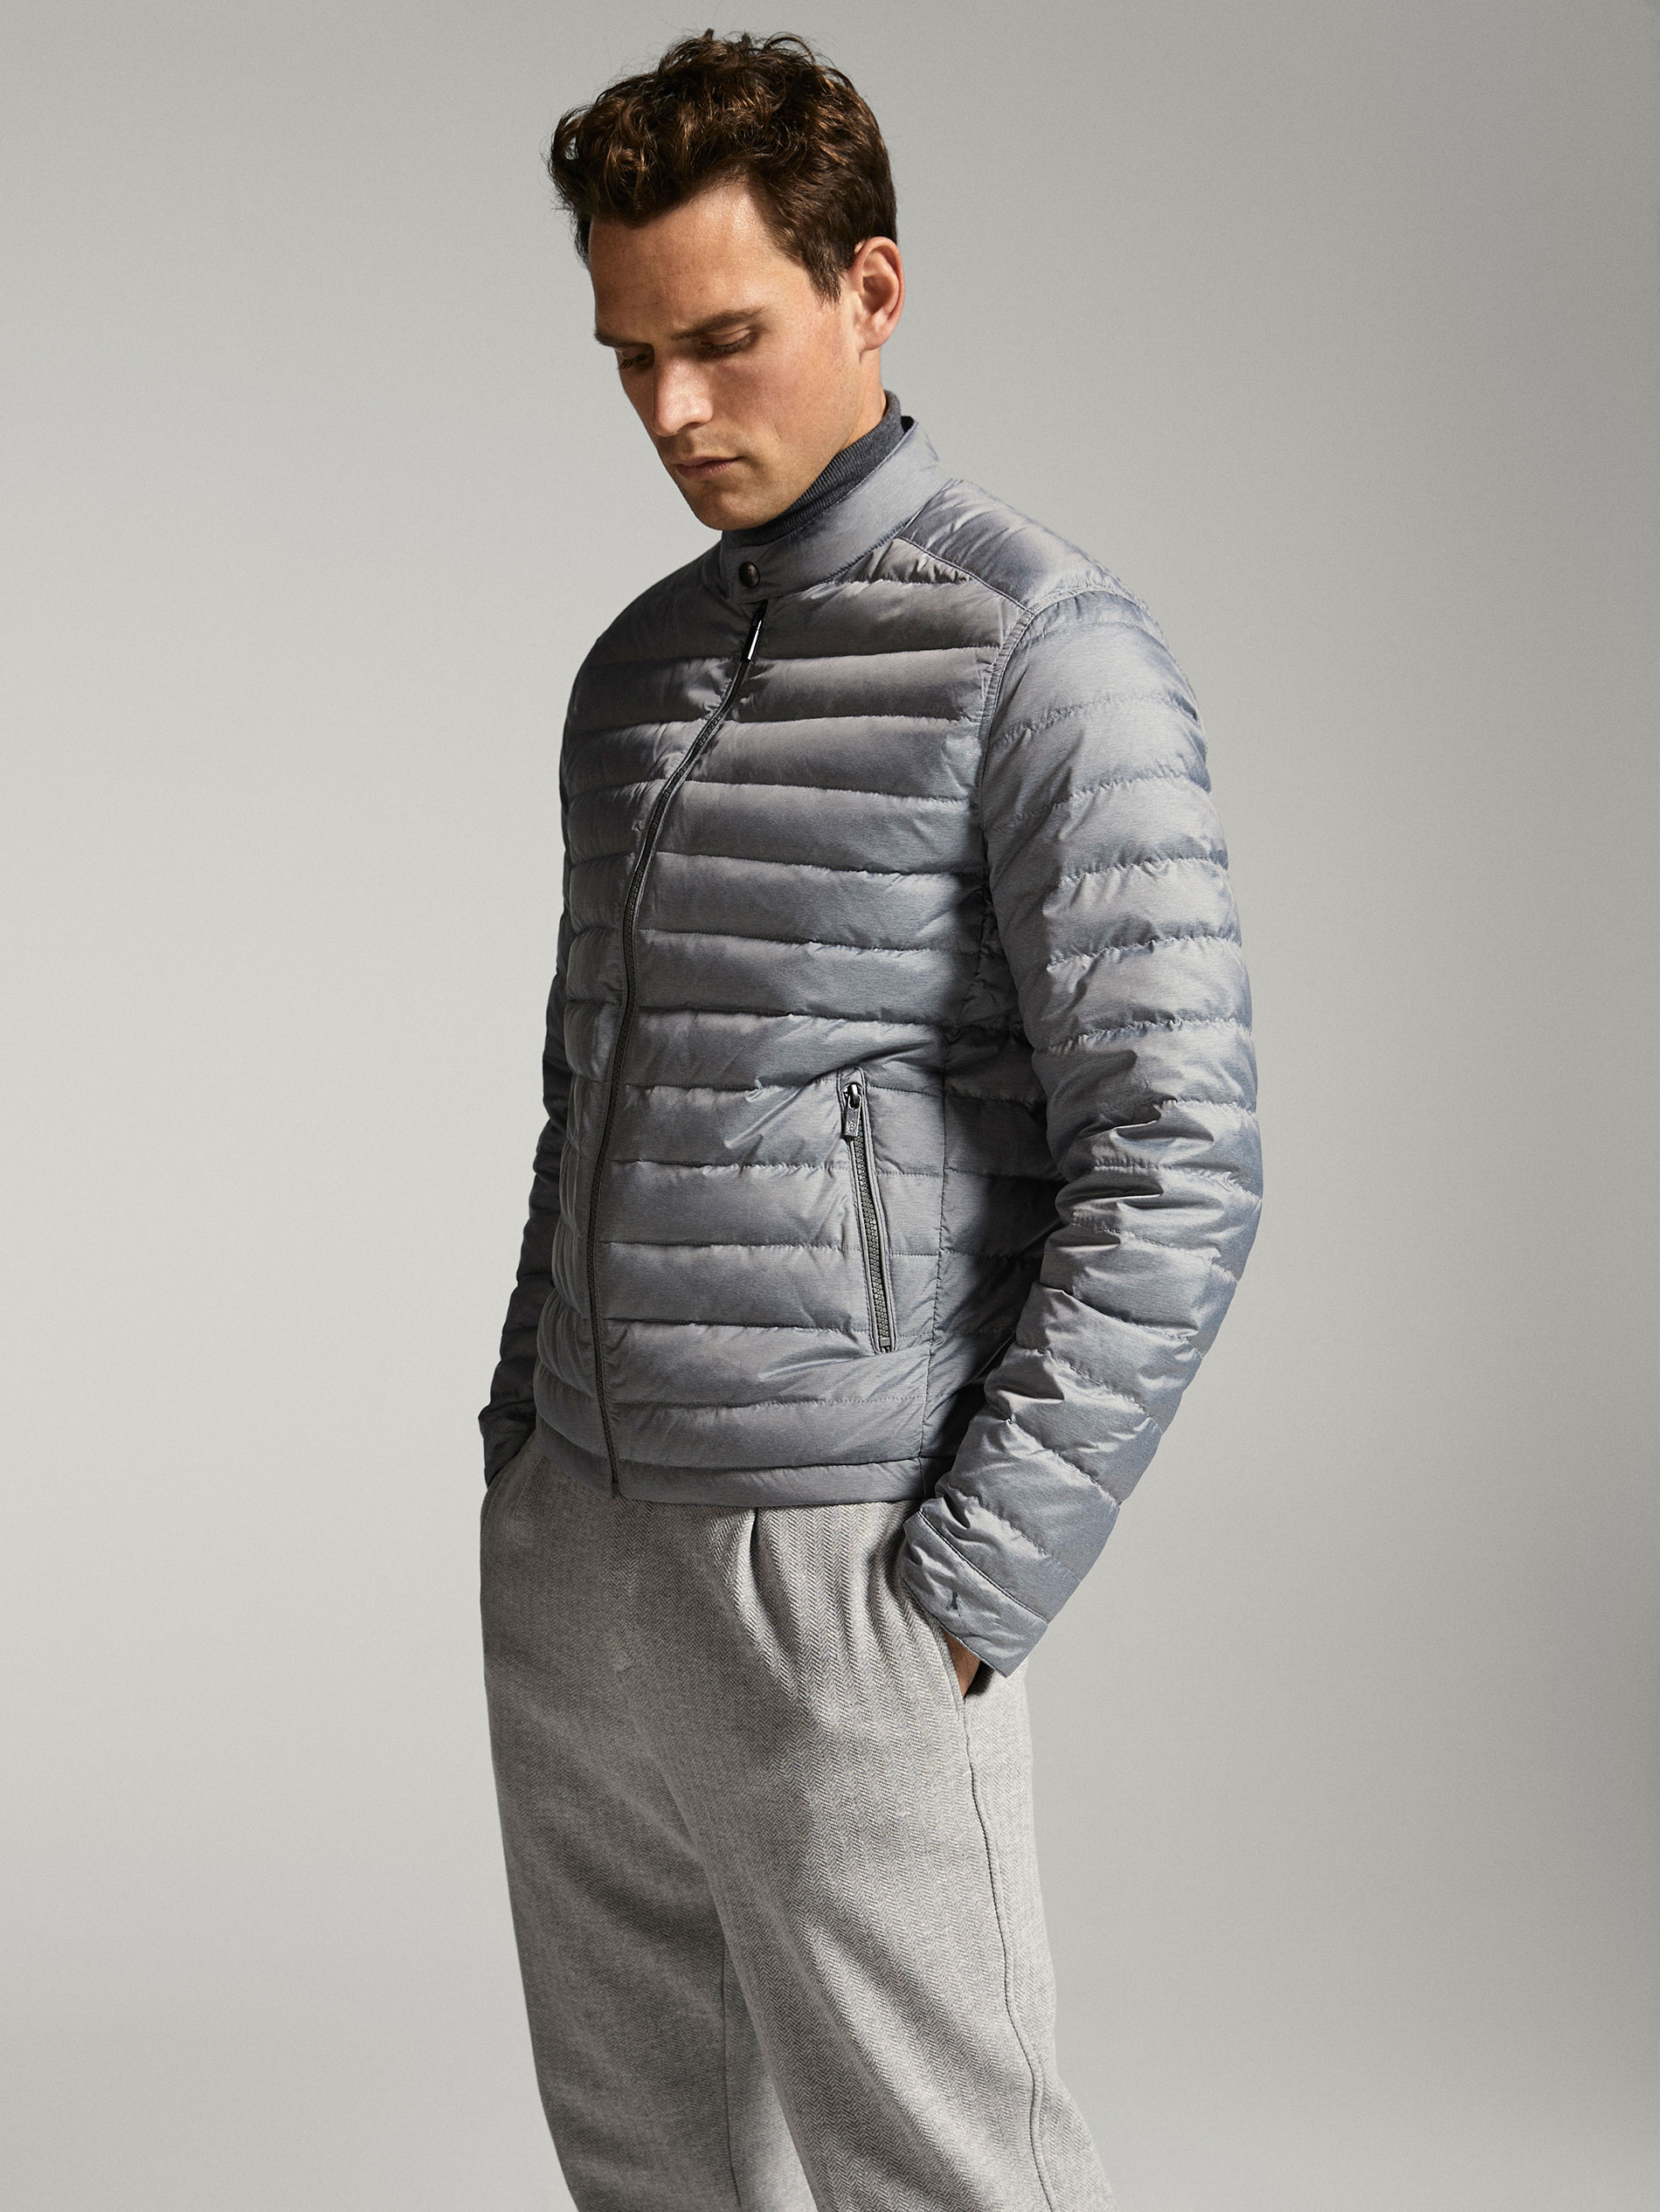 Massimo Dutti GREY MELANGE DOWN PUFFER JACKET at £39.95 | love the brands